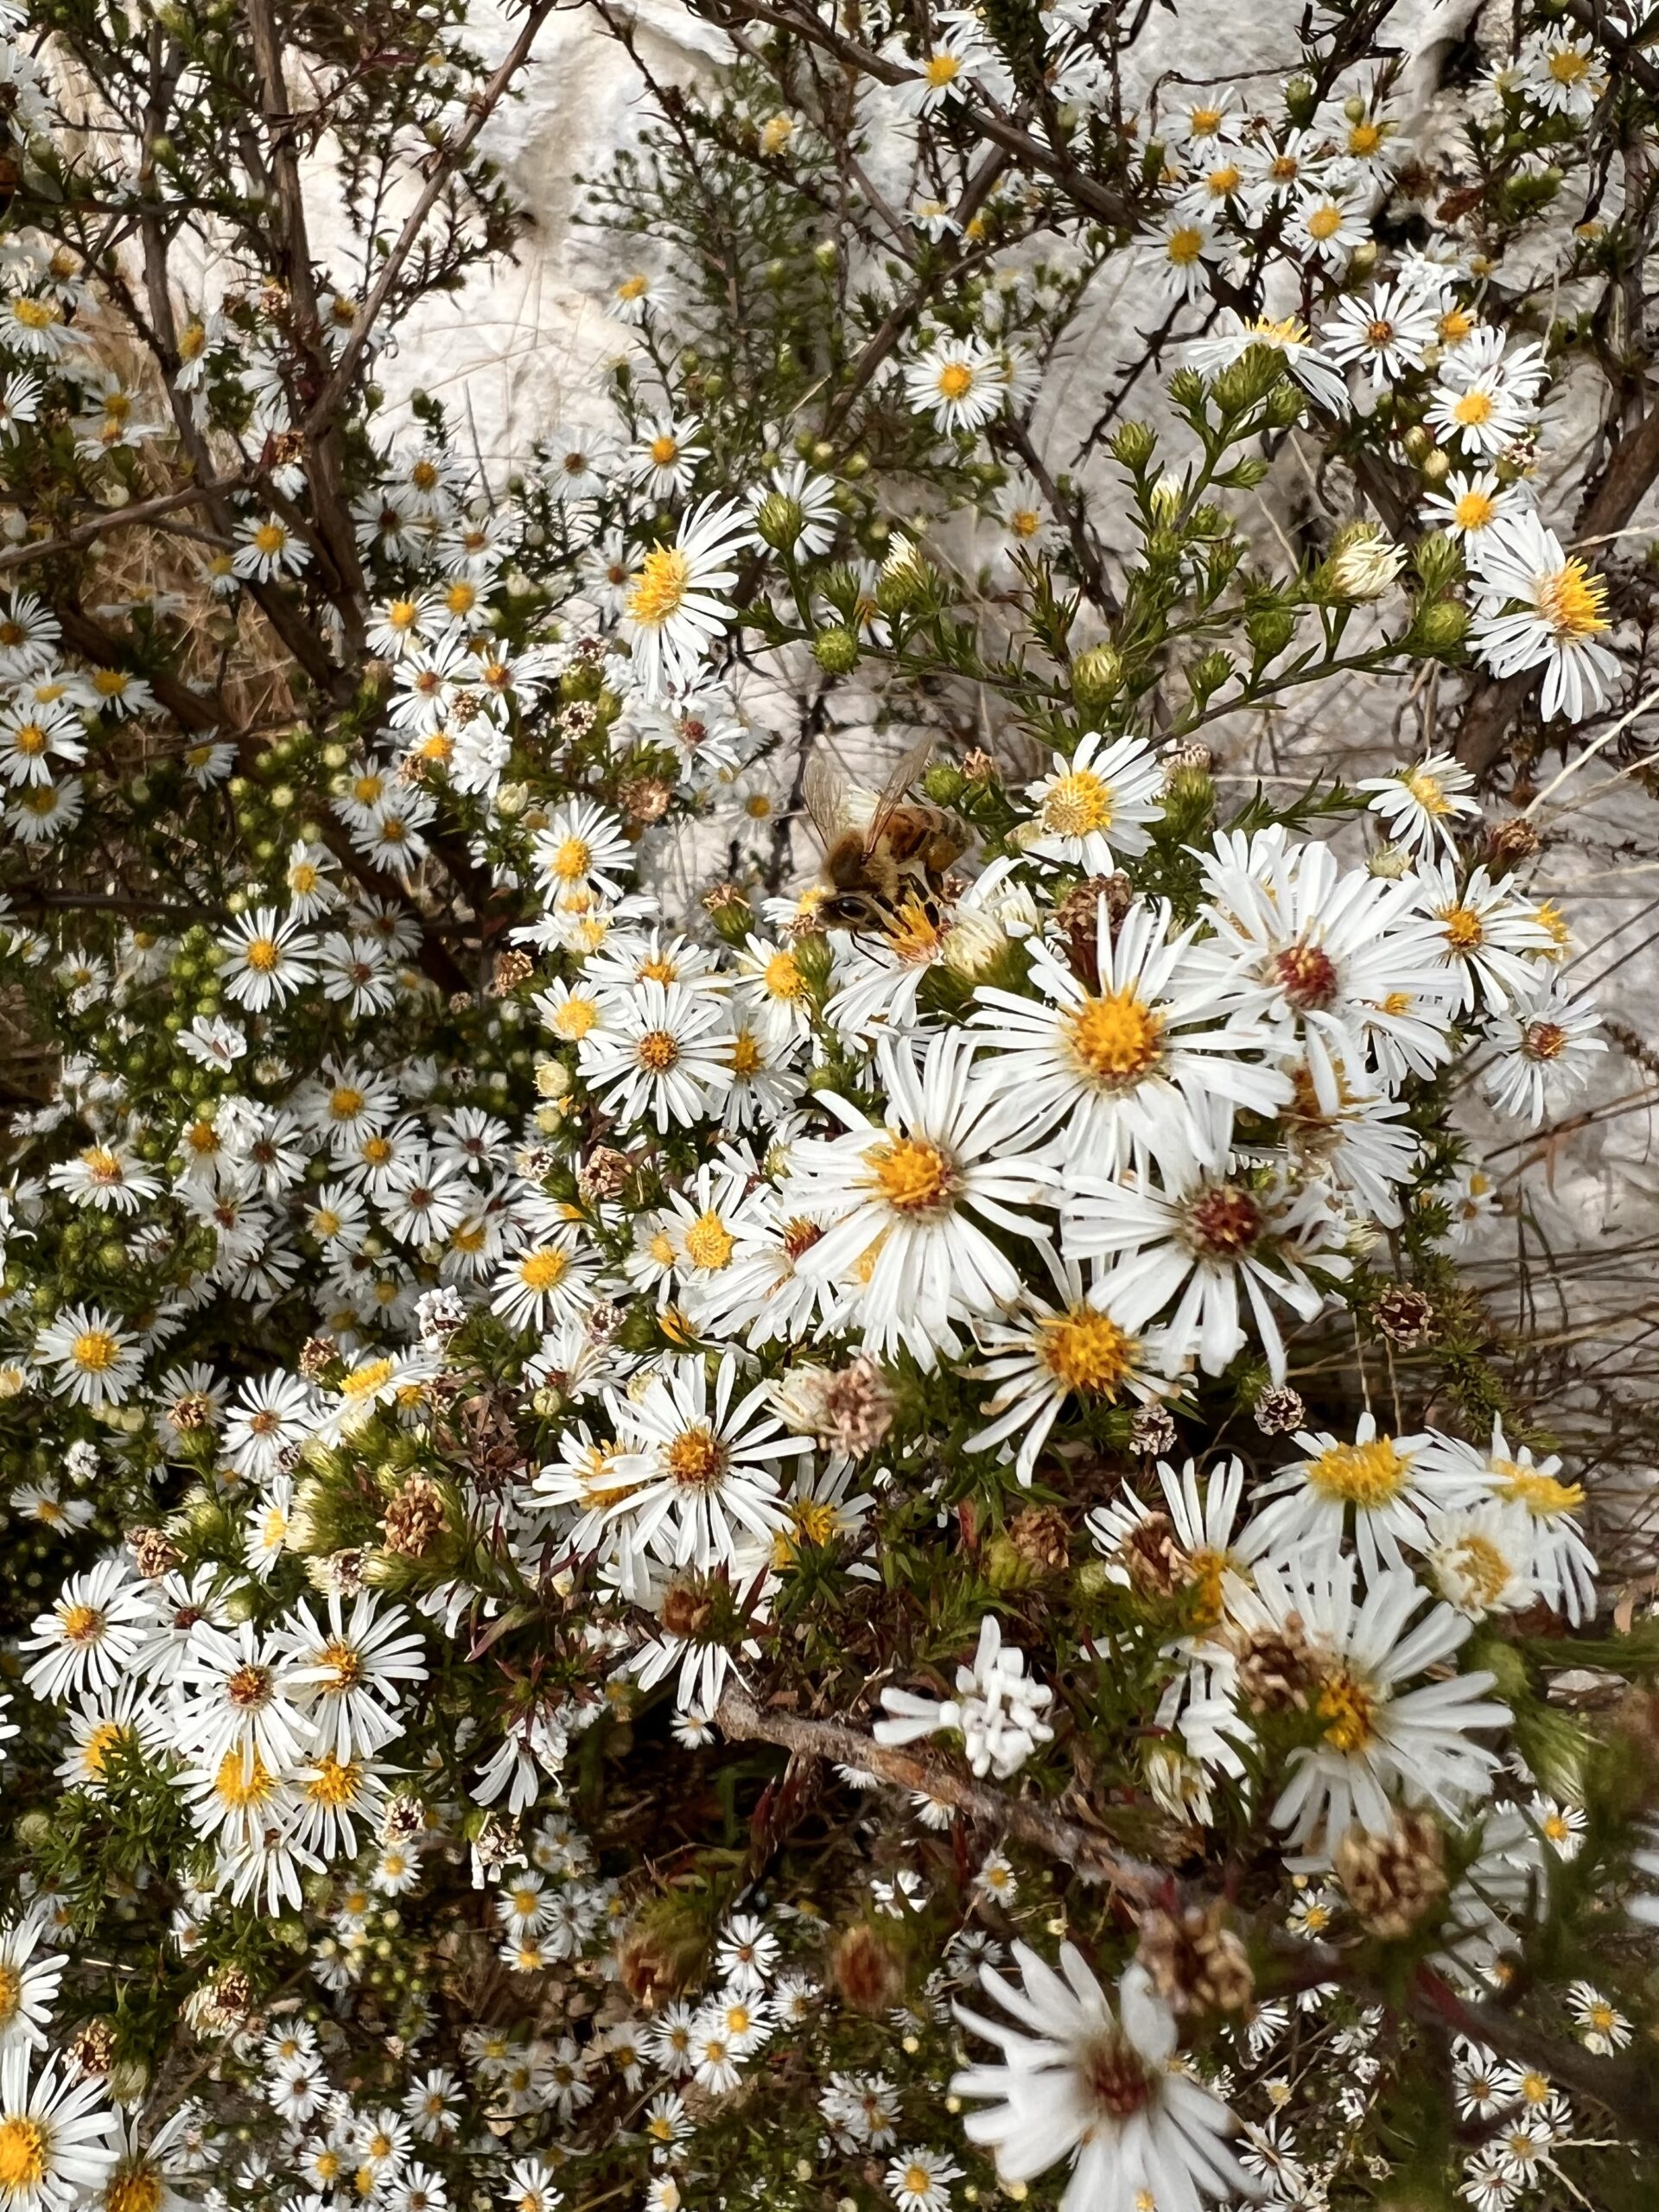 A showy cluster of white heath aster flowers